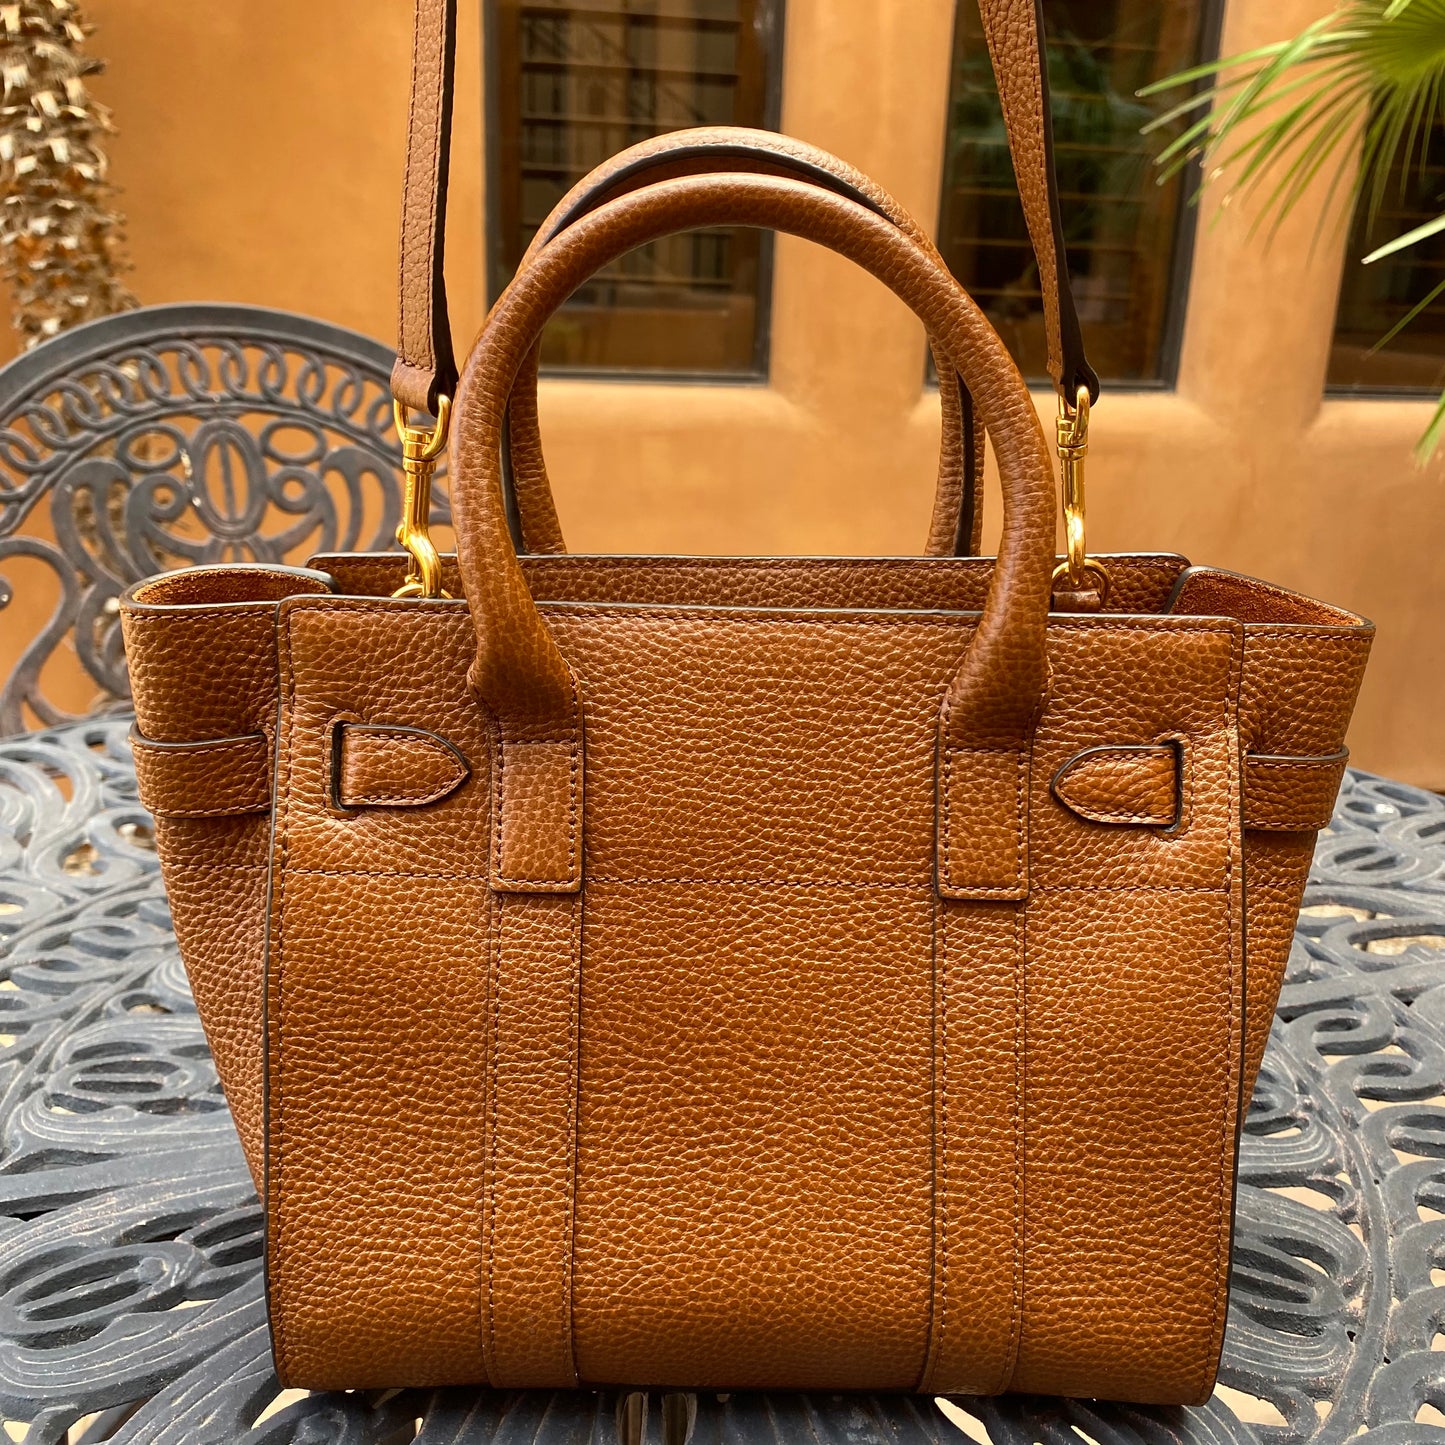 Mulberry Mini Zipped Bayswater Grained Leather Tote